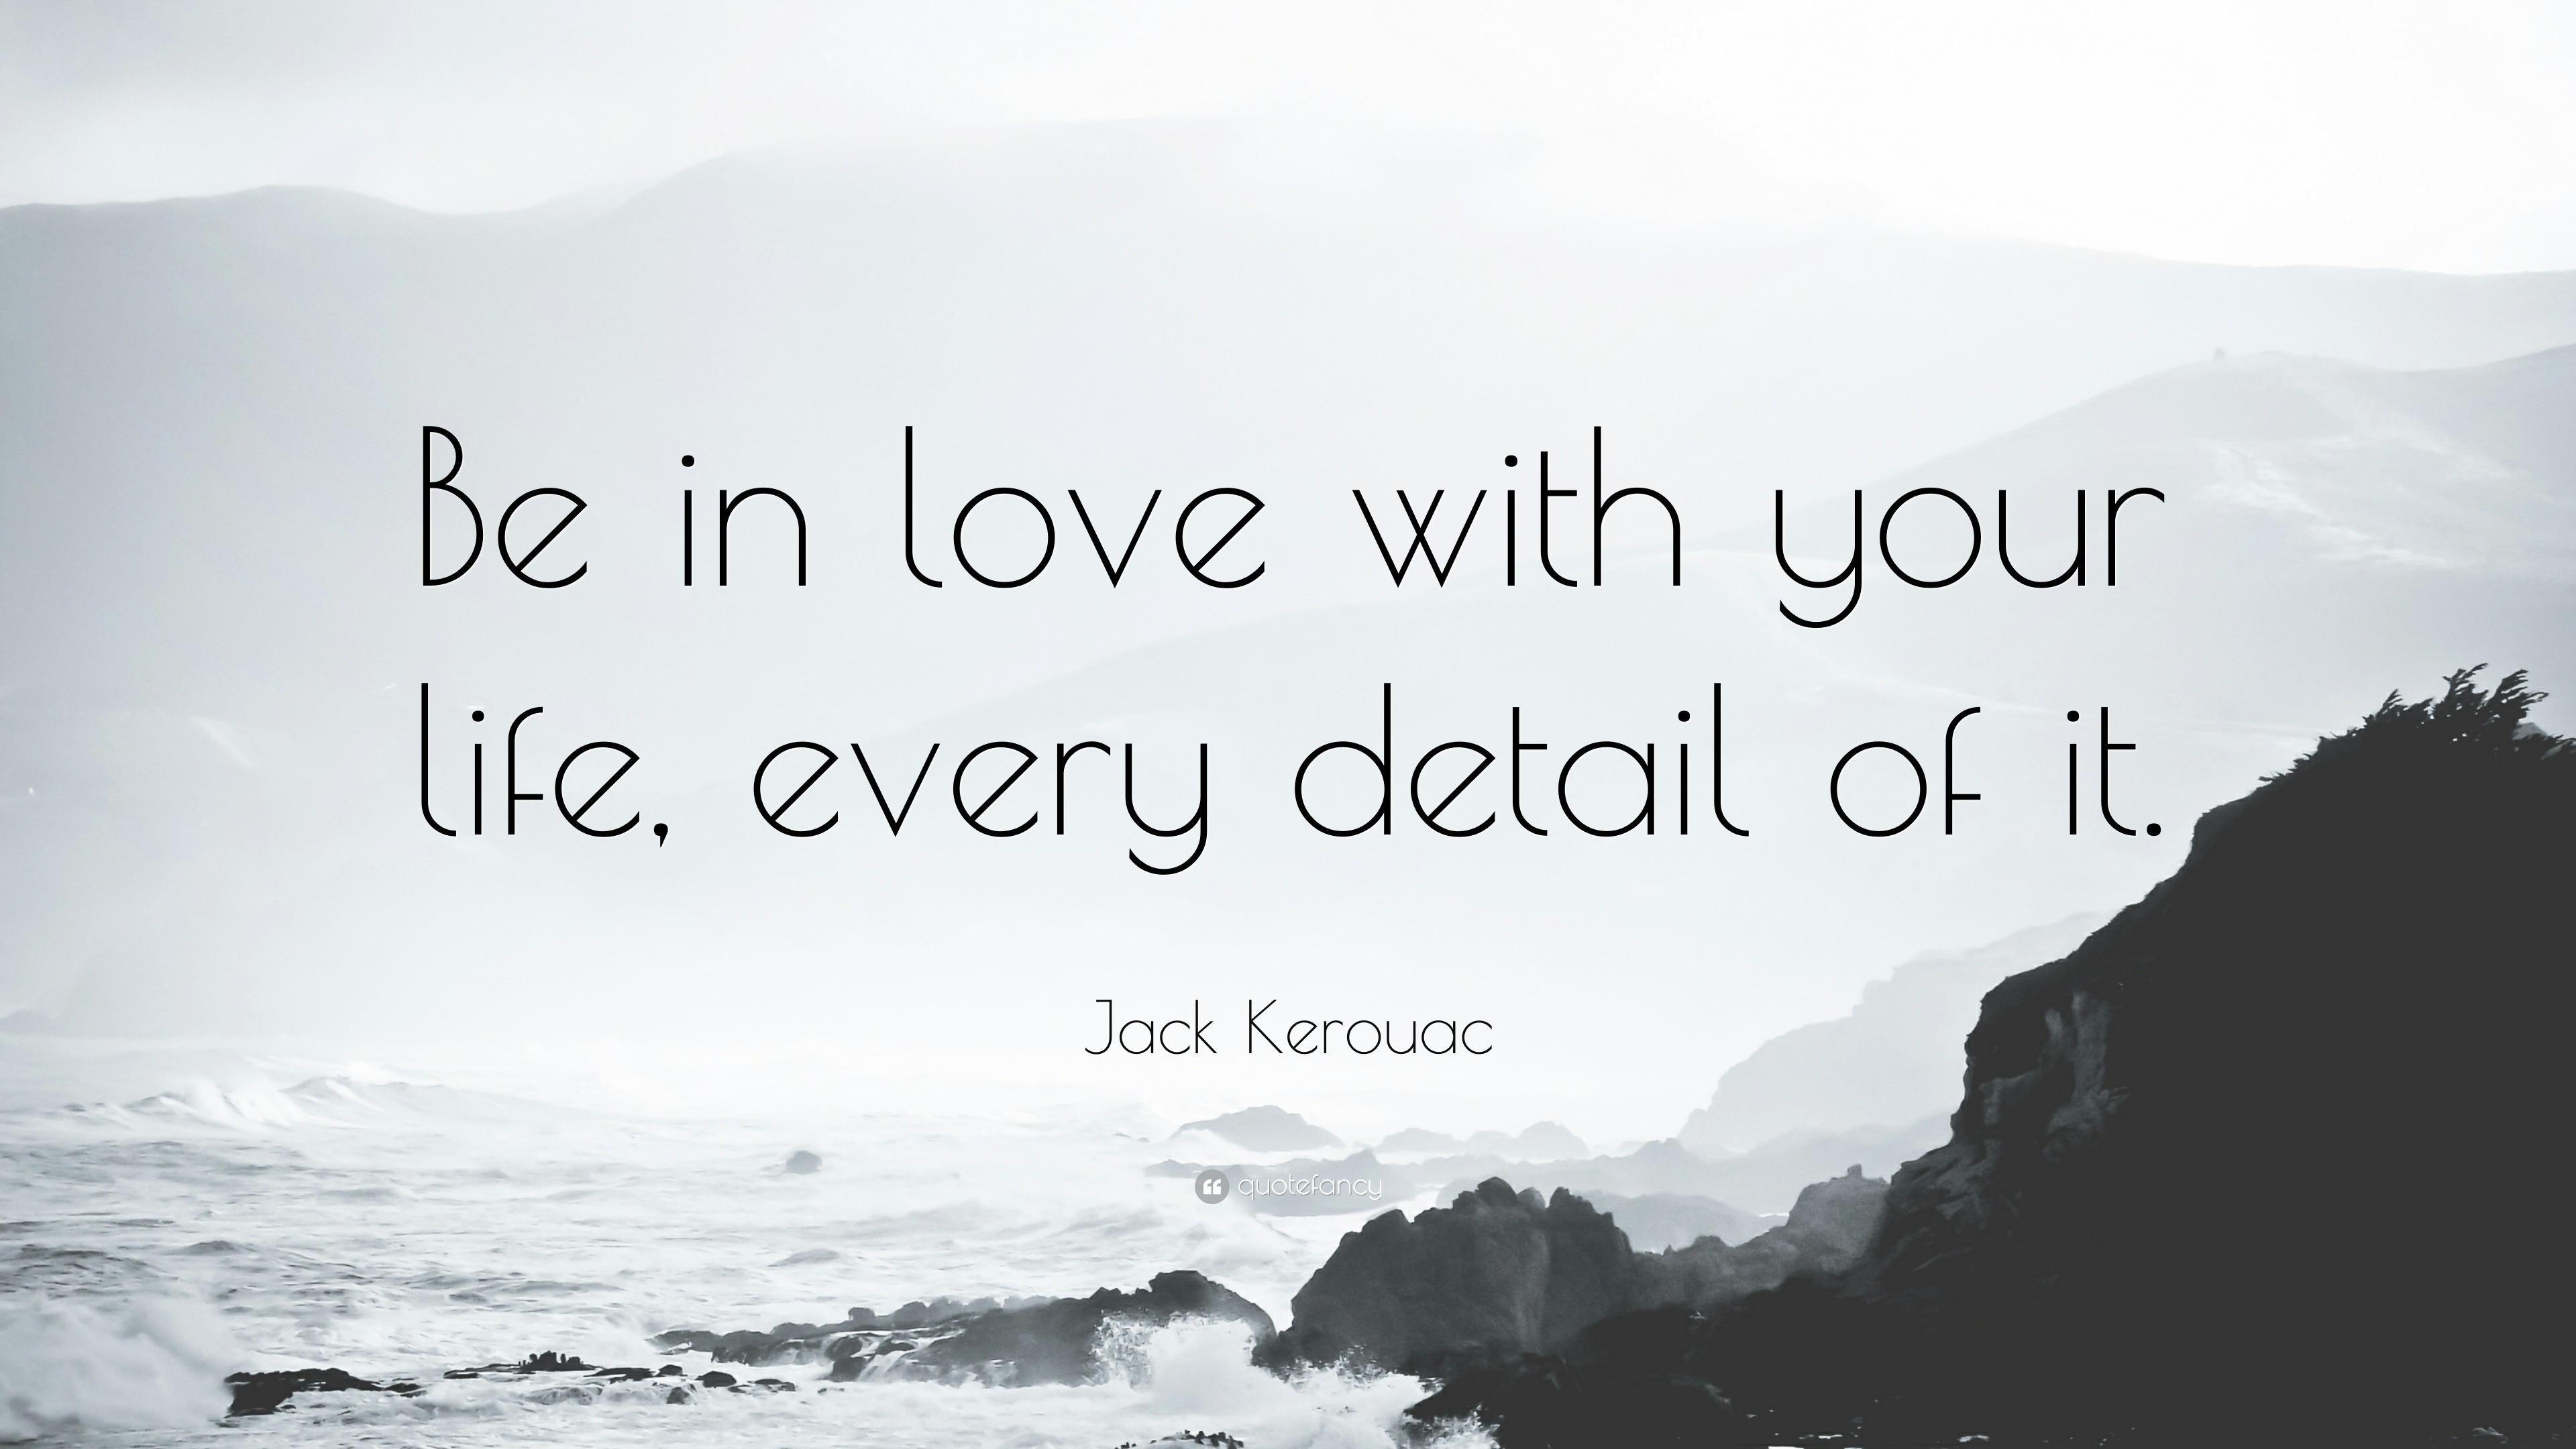 Jack Kerouac Quote “Be in love with your life every detail of it